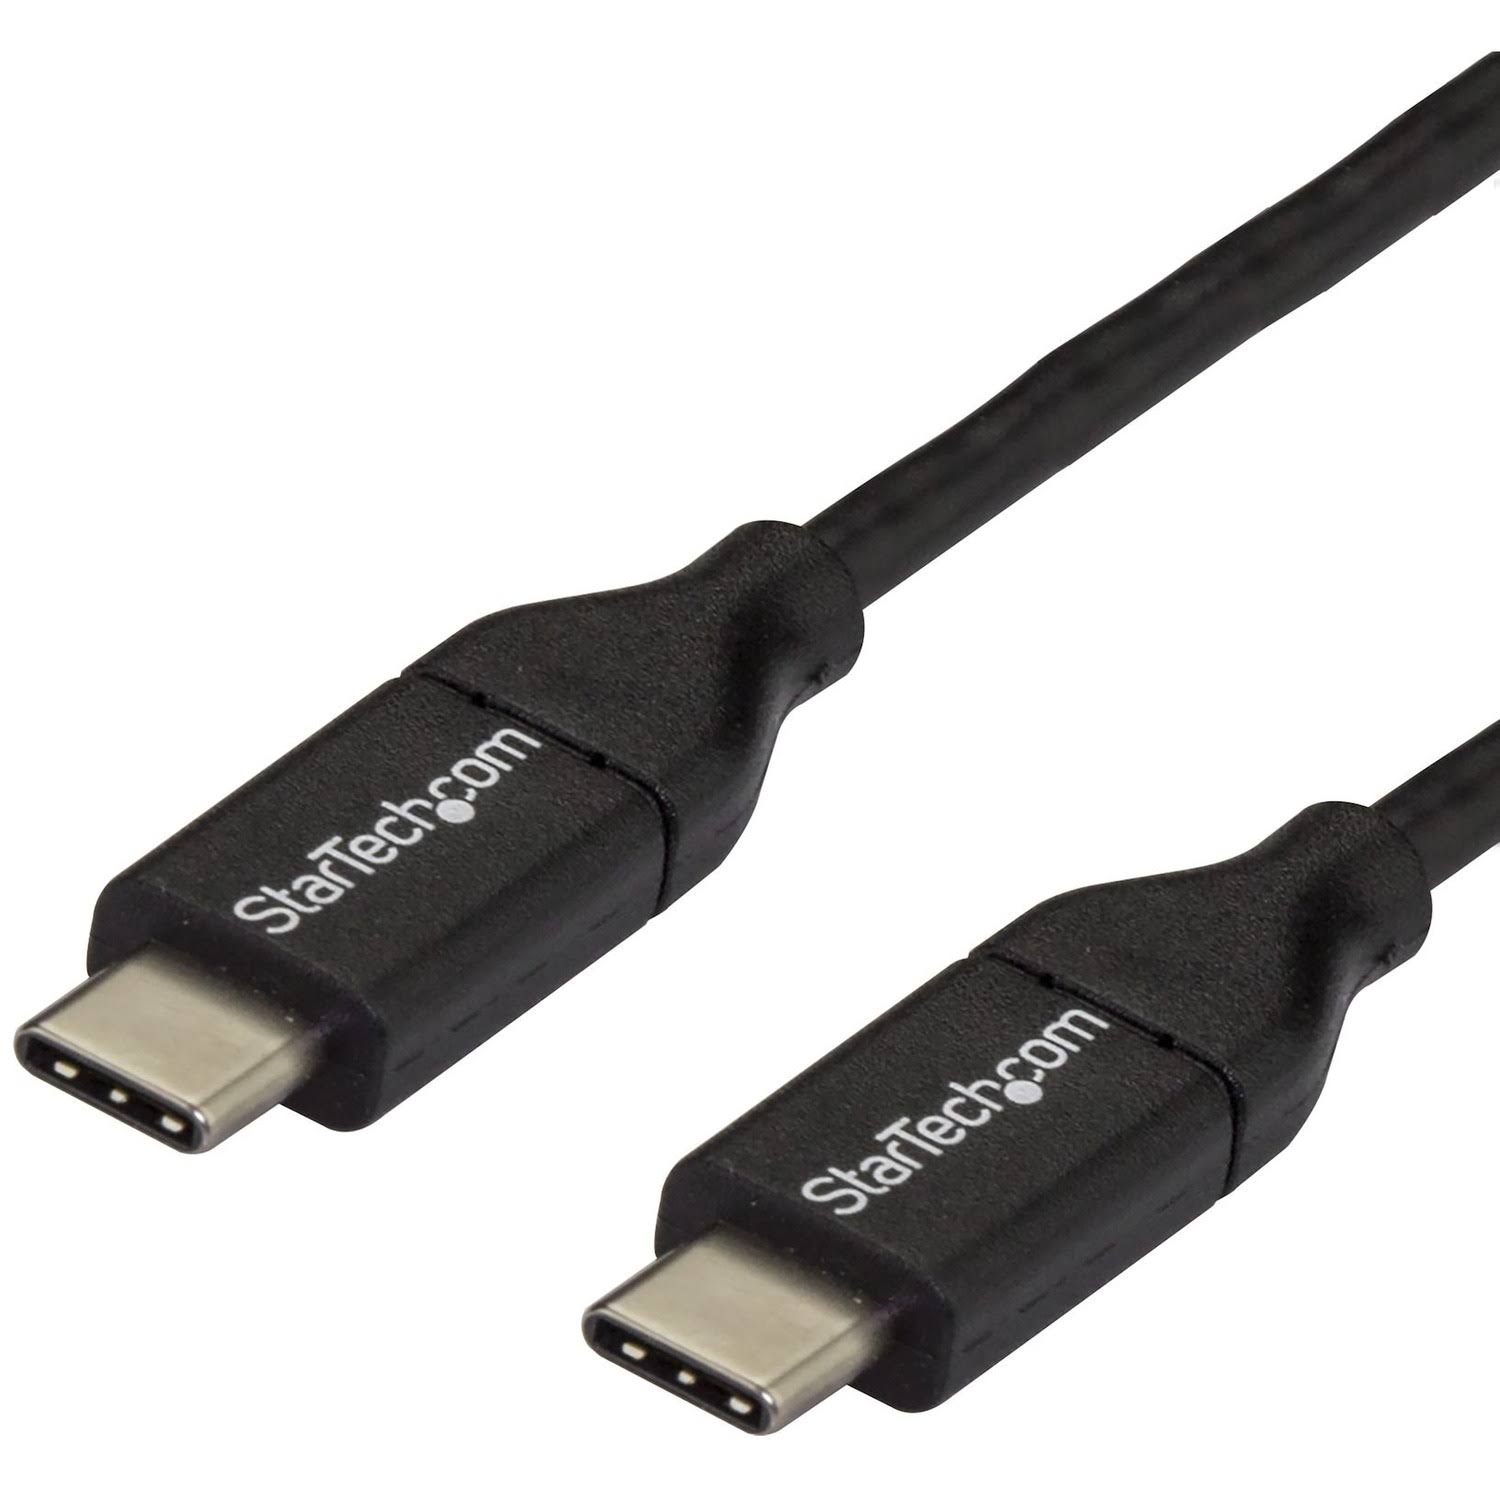 Startech.com 3m 10 Ft Usb C To Usb C Cable - M/m - Usb 2.0 - Usb Type C Cable